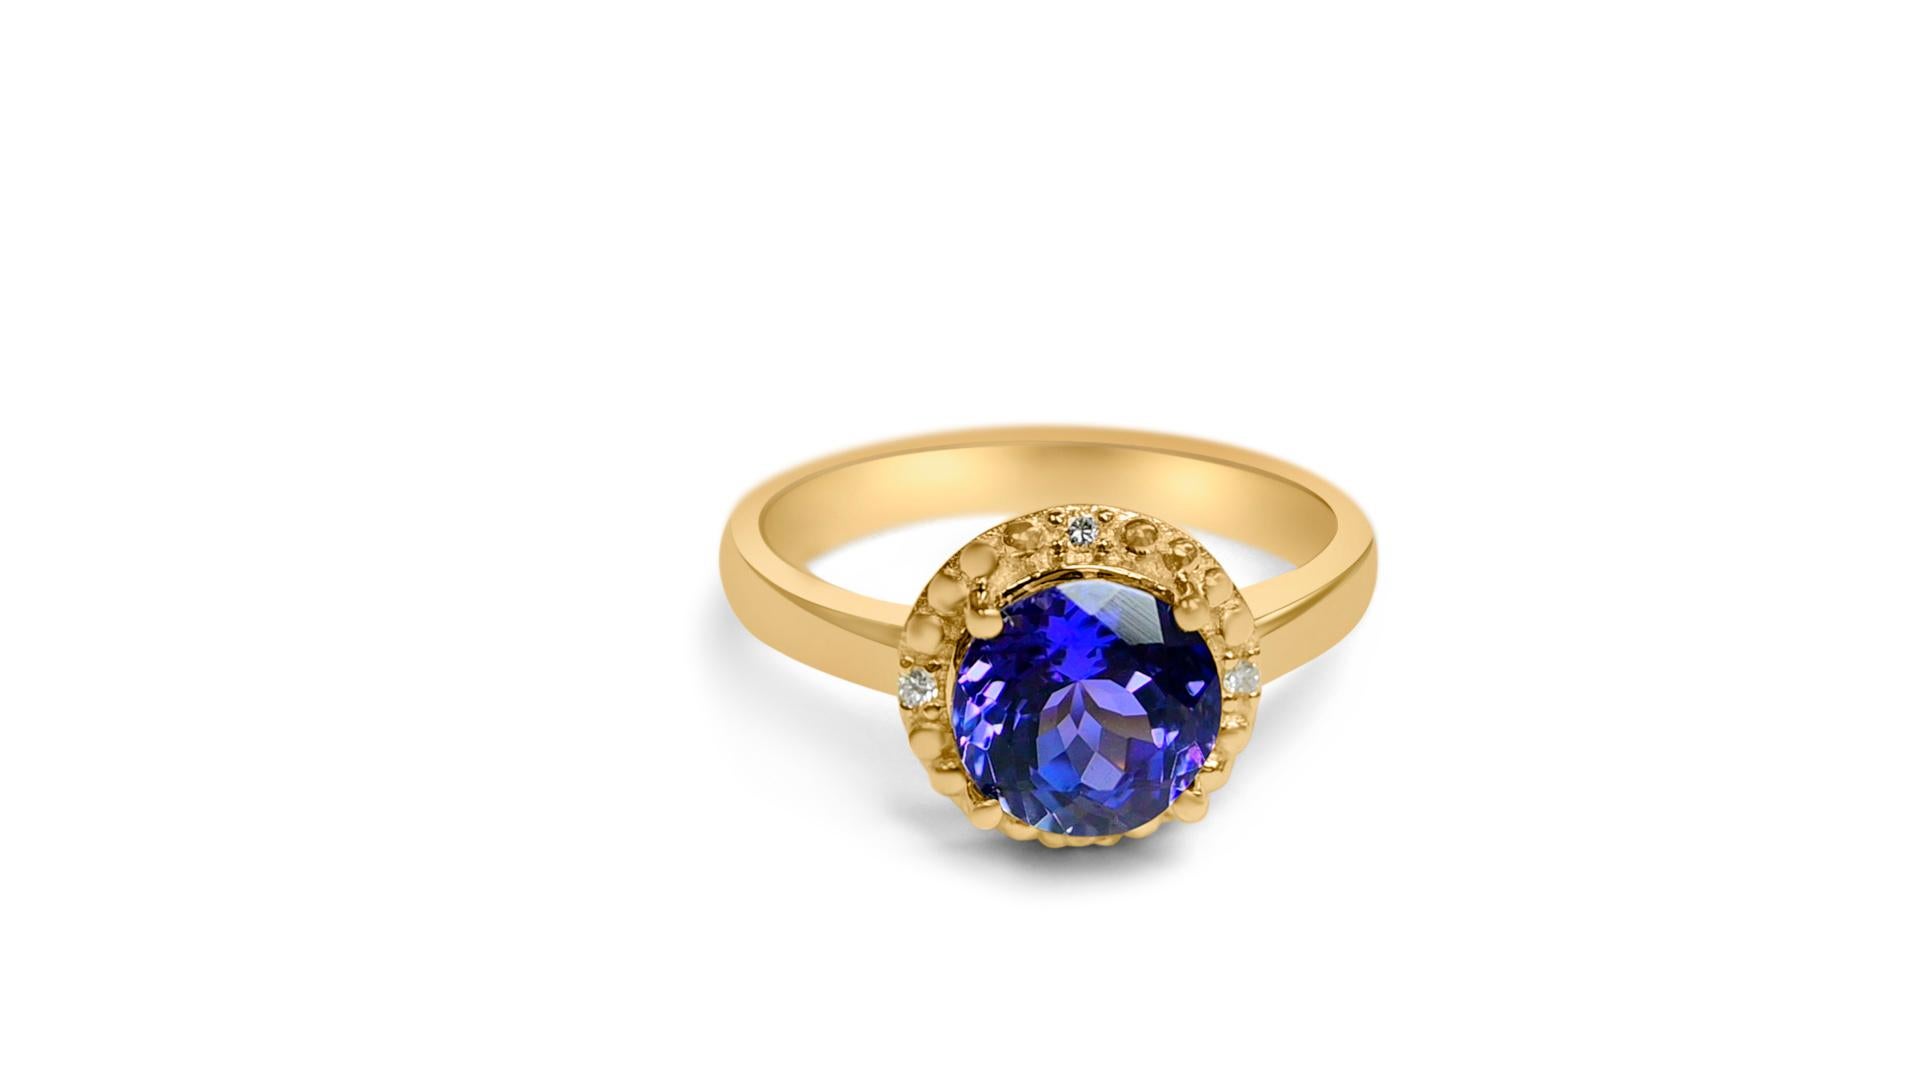 Art Deco 2.24 Ctw Natural Tanzanite Solitaire Ring 14K Gold Bridal Ring For Women Jewelry For Sale